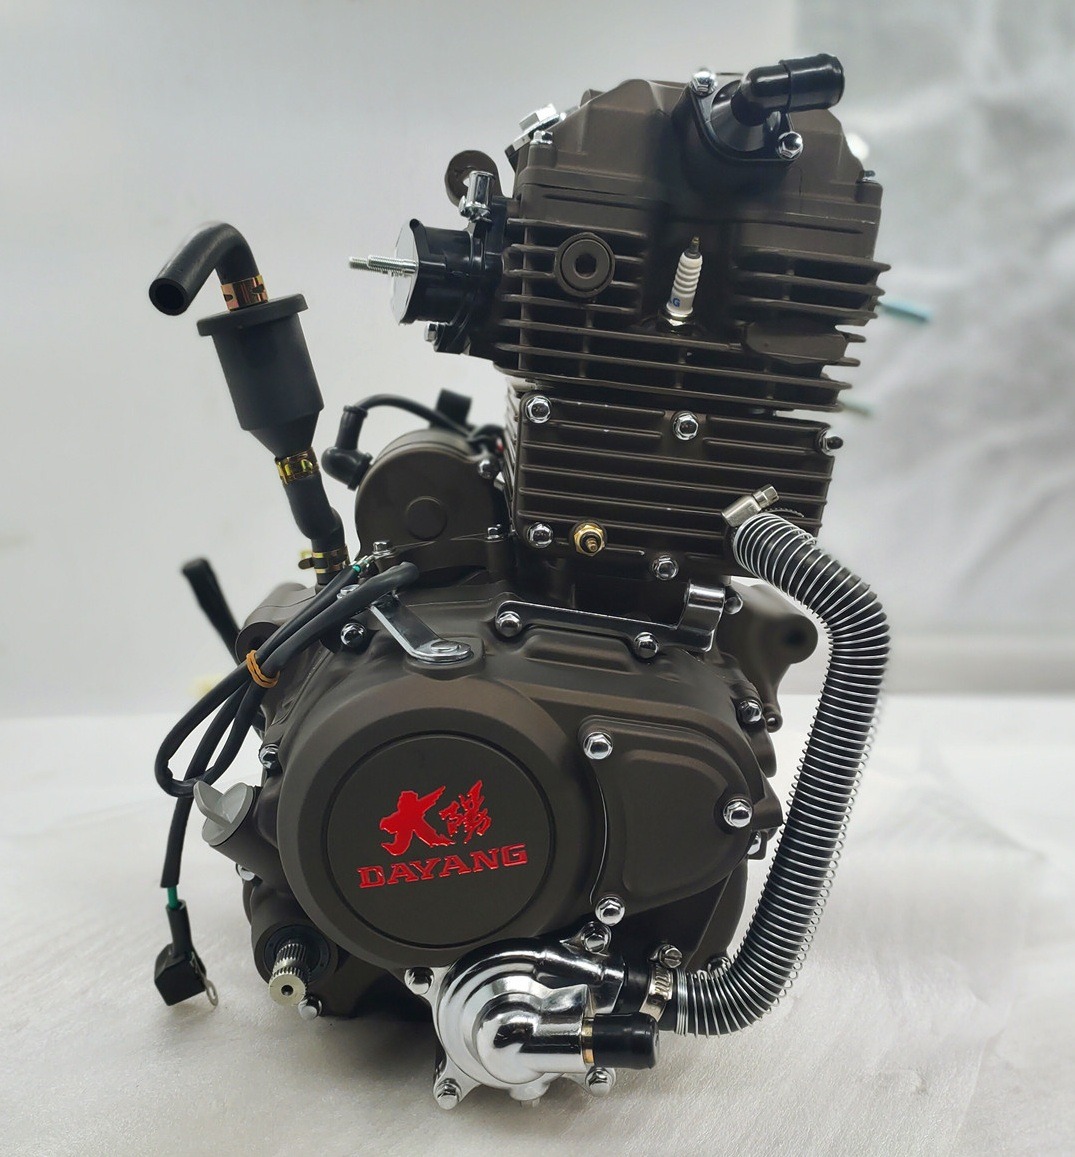 CG Cool 250cc DAYANG LIFAN Motorcycle Engine Assembly Single Cylinder Four Stroke Style China Origin Quality CCC